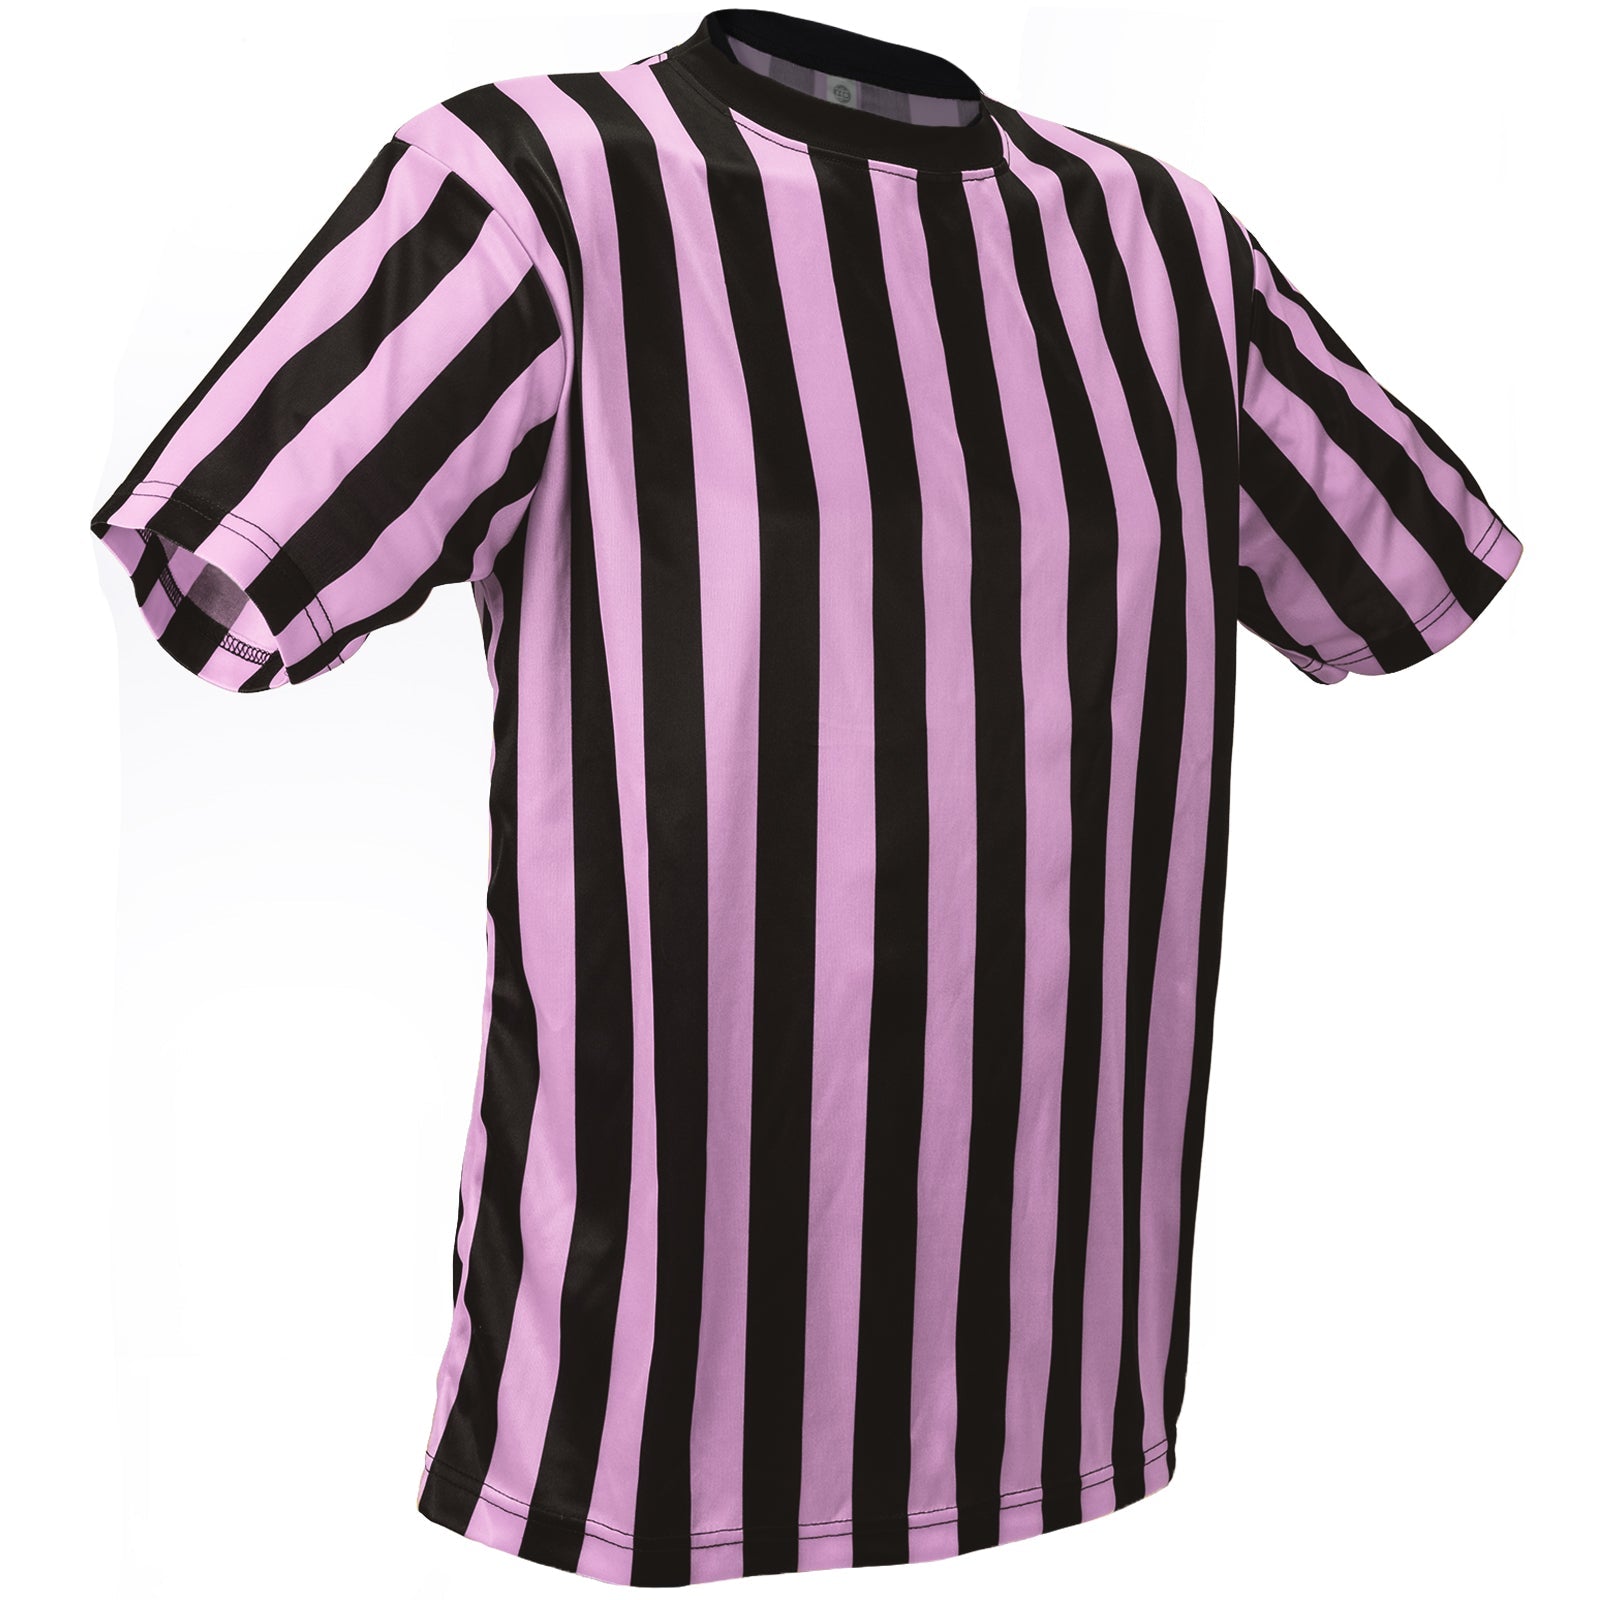 Men's Crew Neck Referee Shirts for Officials and Staff - Mato & Hash